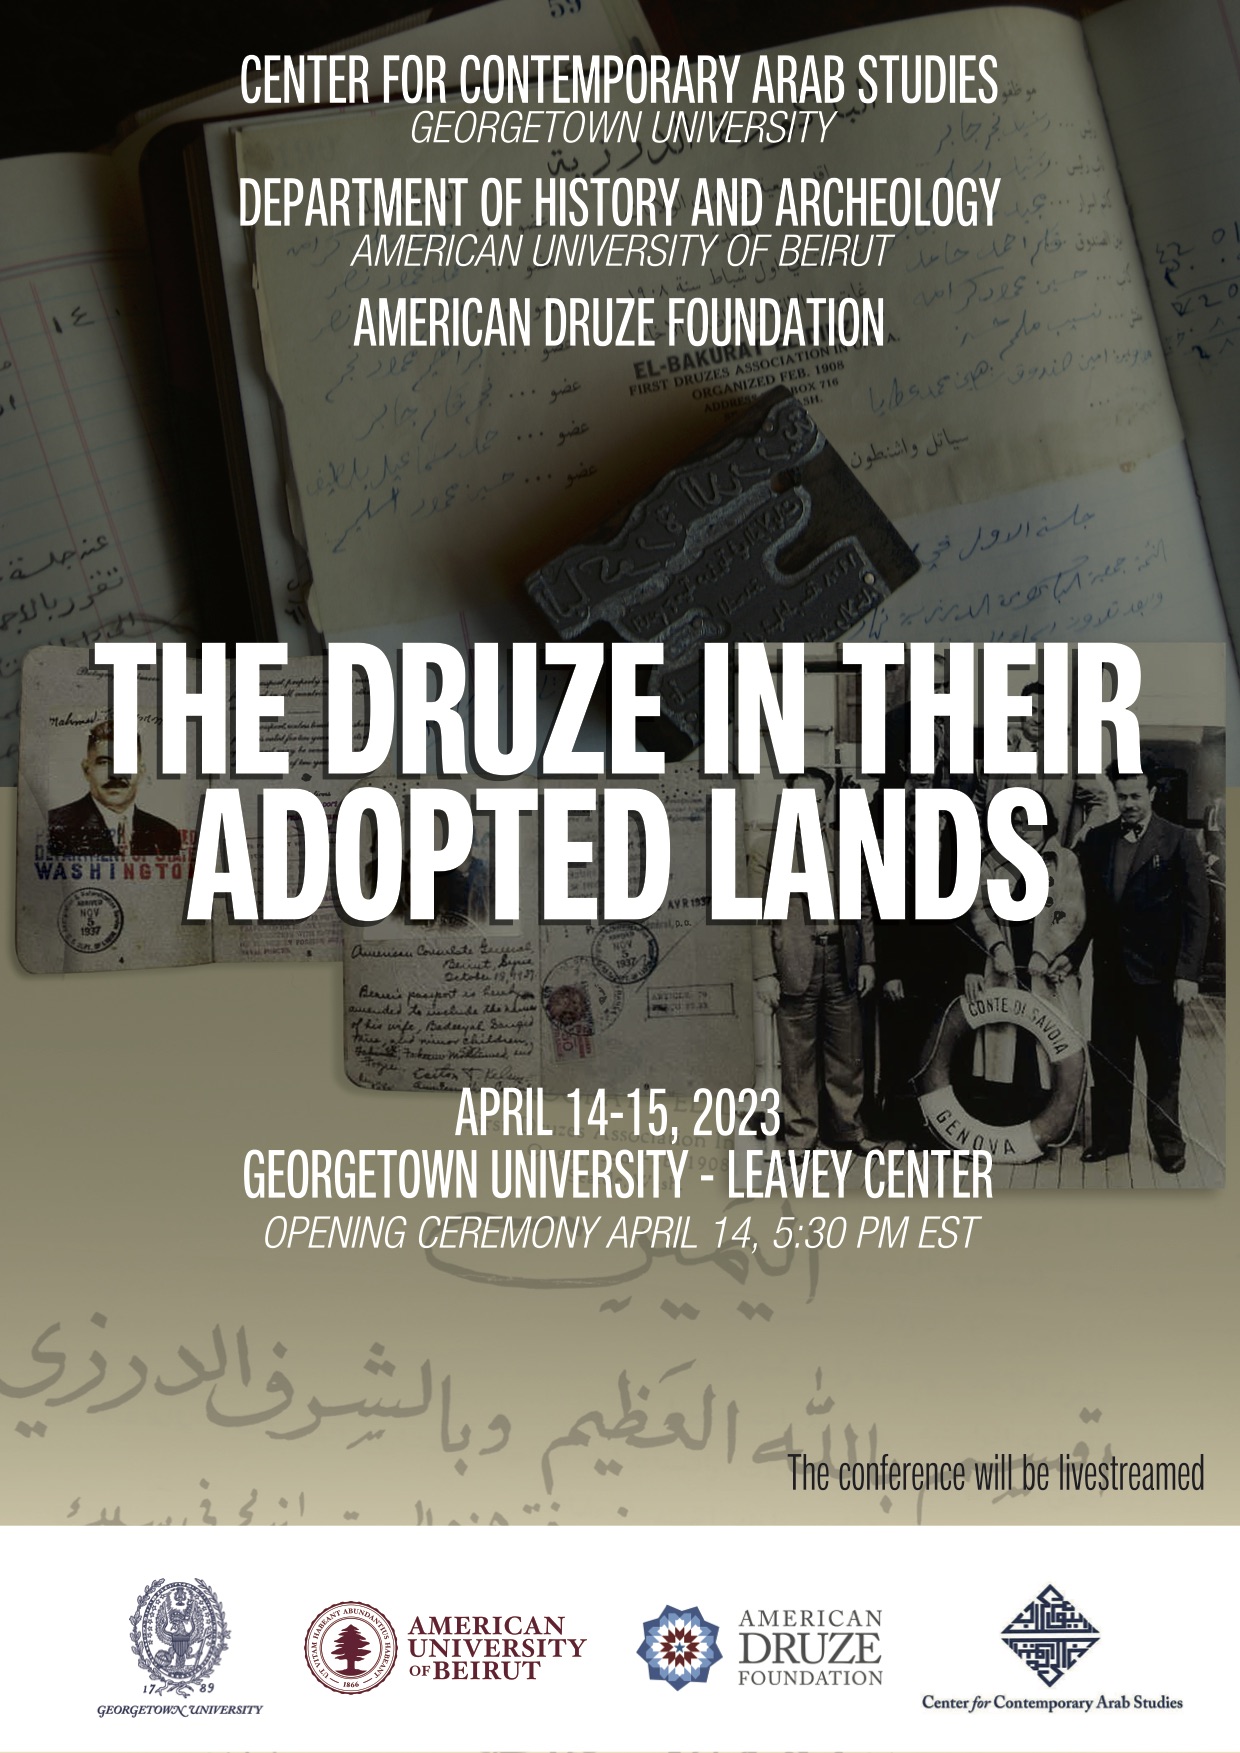 Graphic with handwritten pages and text, “CCAS, the Department of History and Archeology at American University of Beirut, and the American Druze Foundation: The Druze in their Adopted Lands” and logistical information listed below.